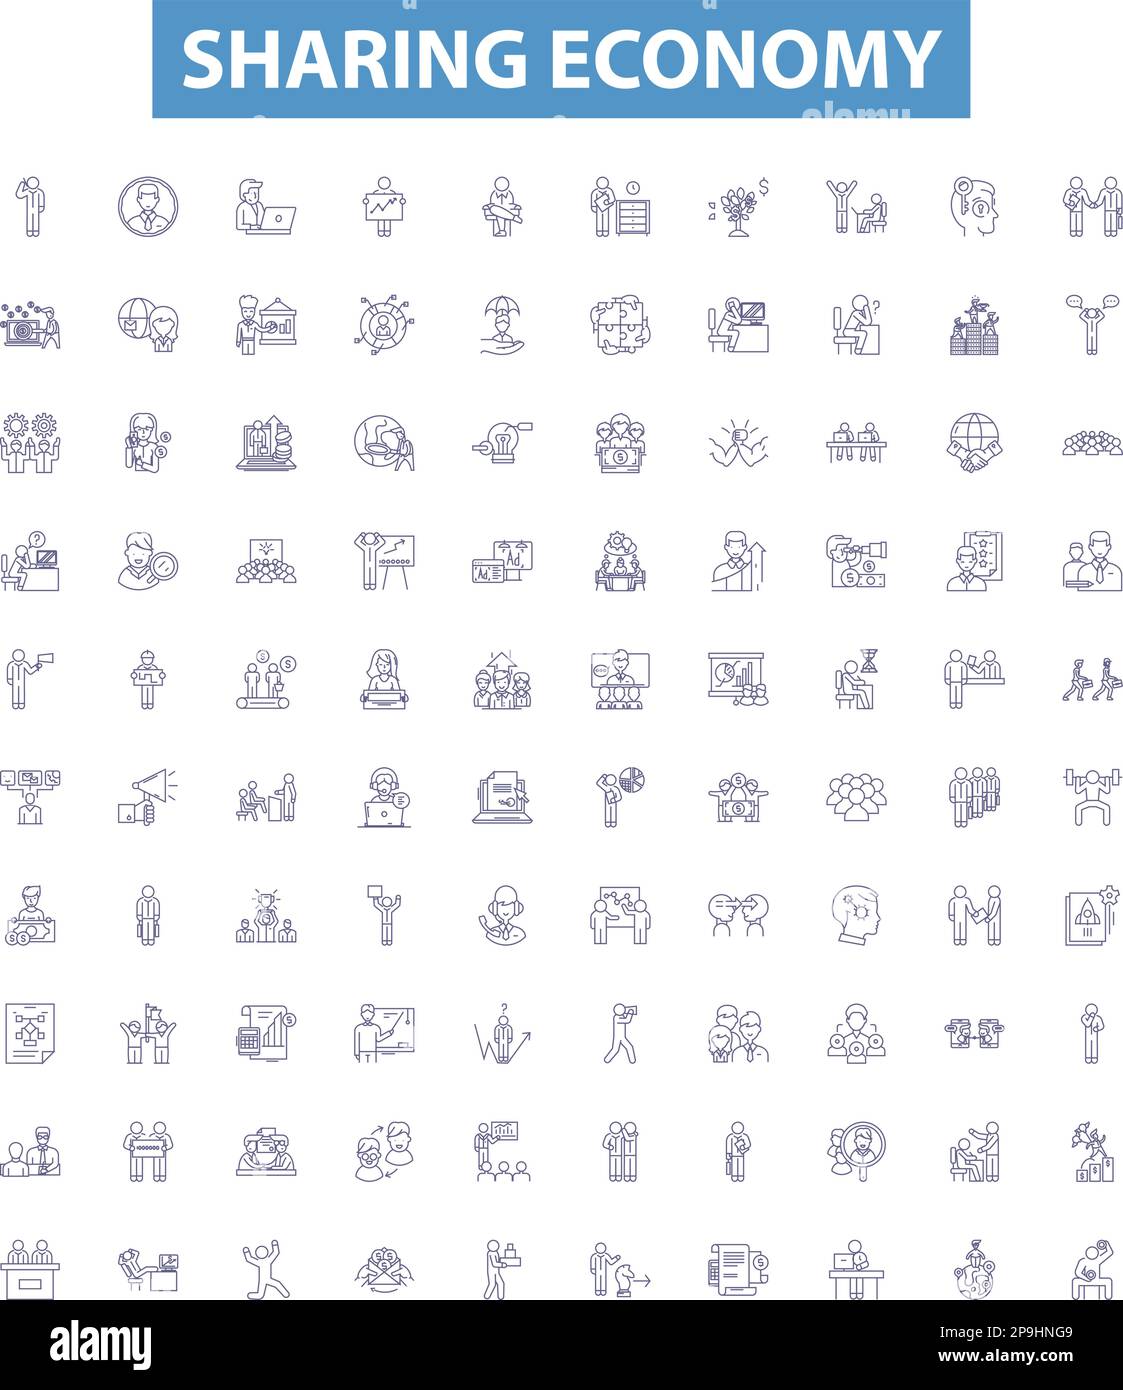 Sharing economy line icons, signs set. Collaborative, Bartering, Exchange, Platforms, Networking, Connecting, Carsharing, Homesharing, Bikesharing Stock Vector